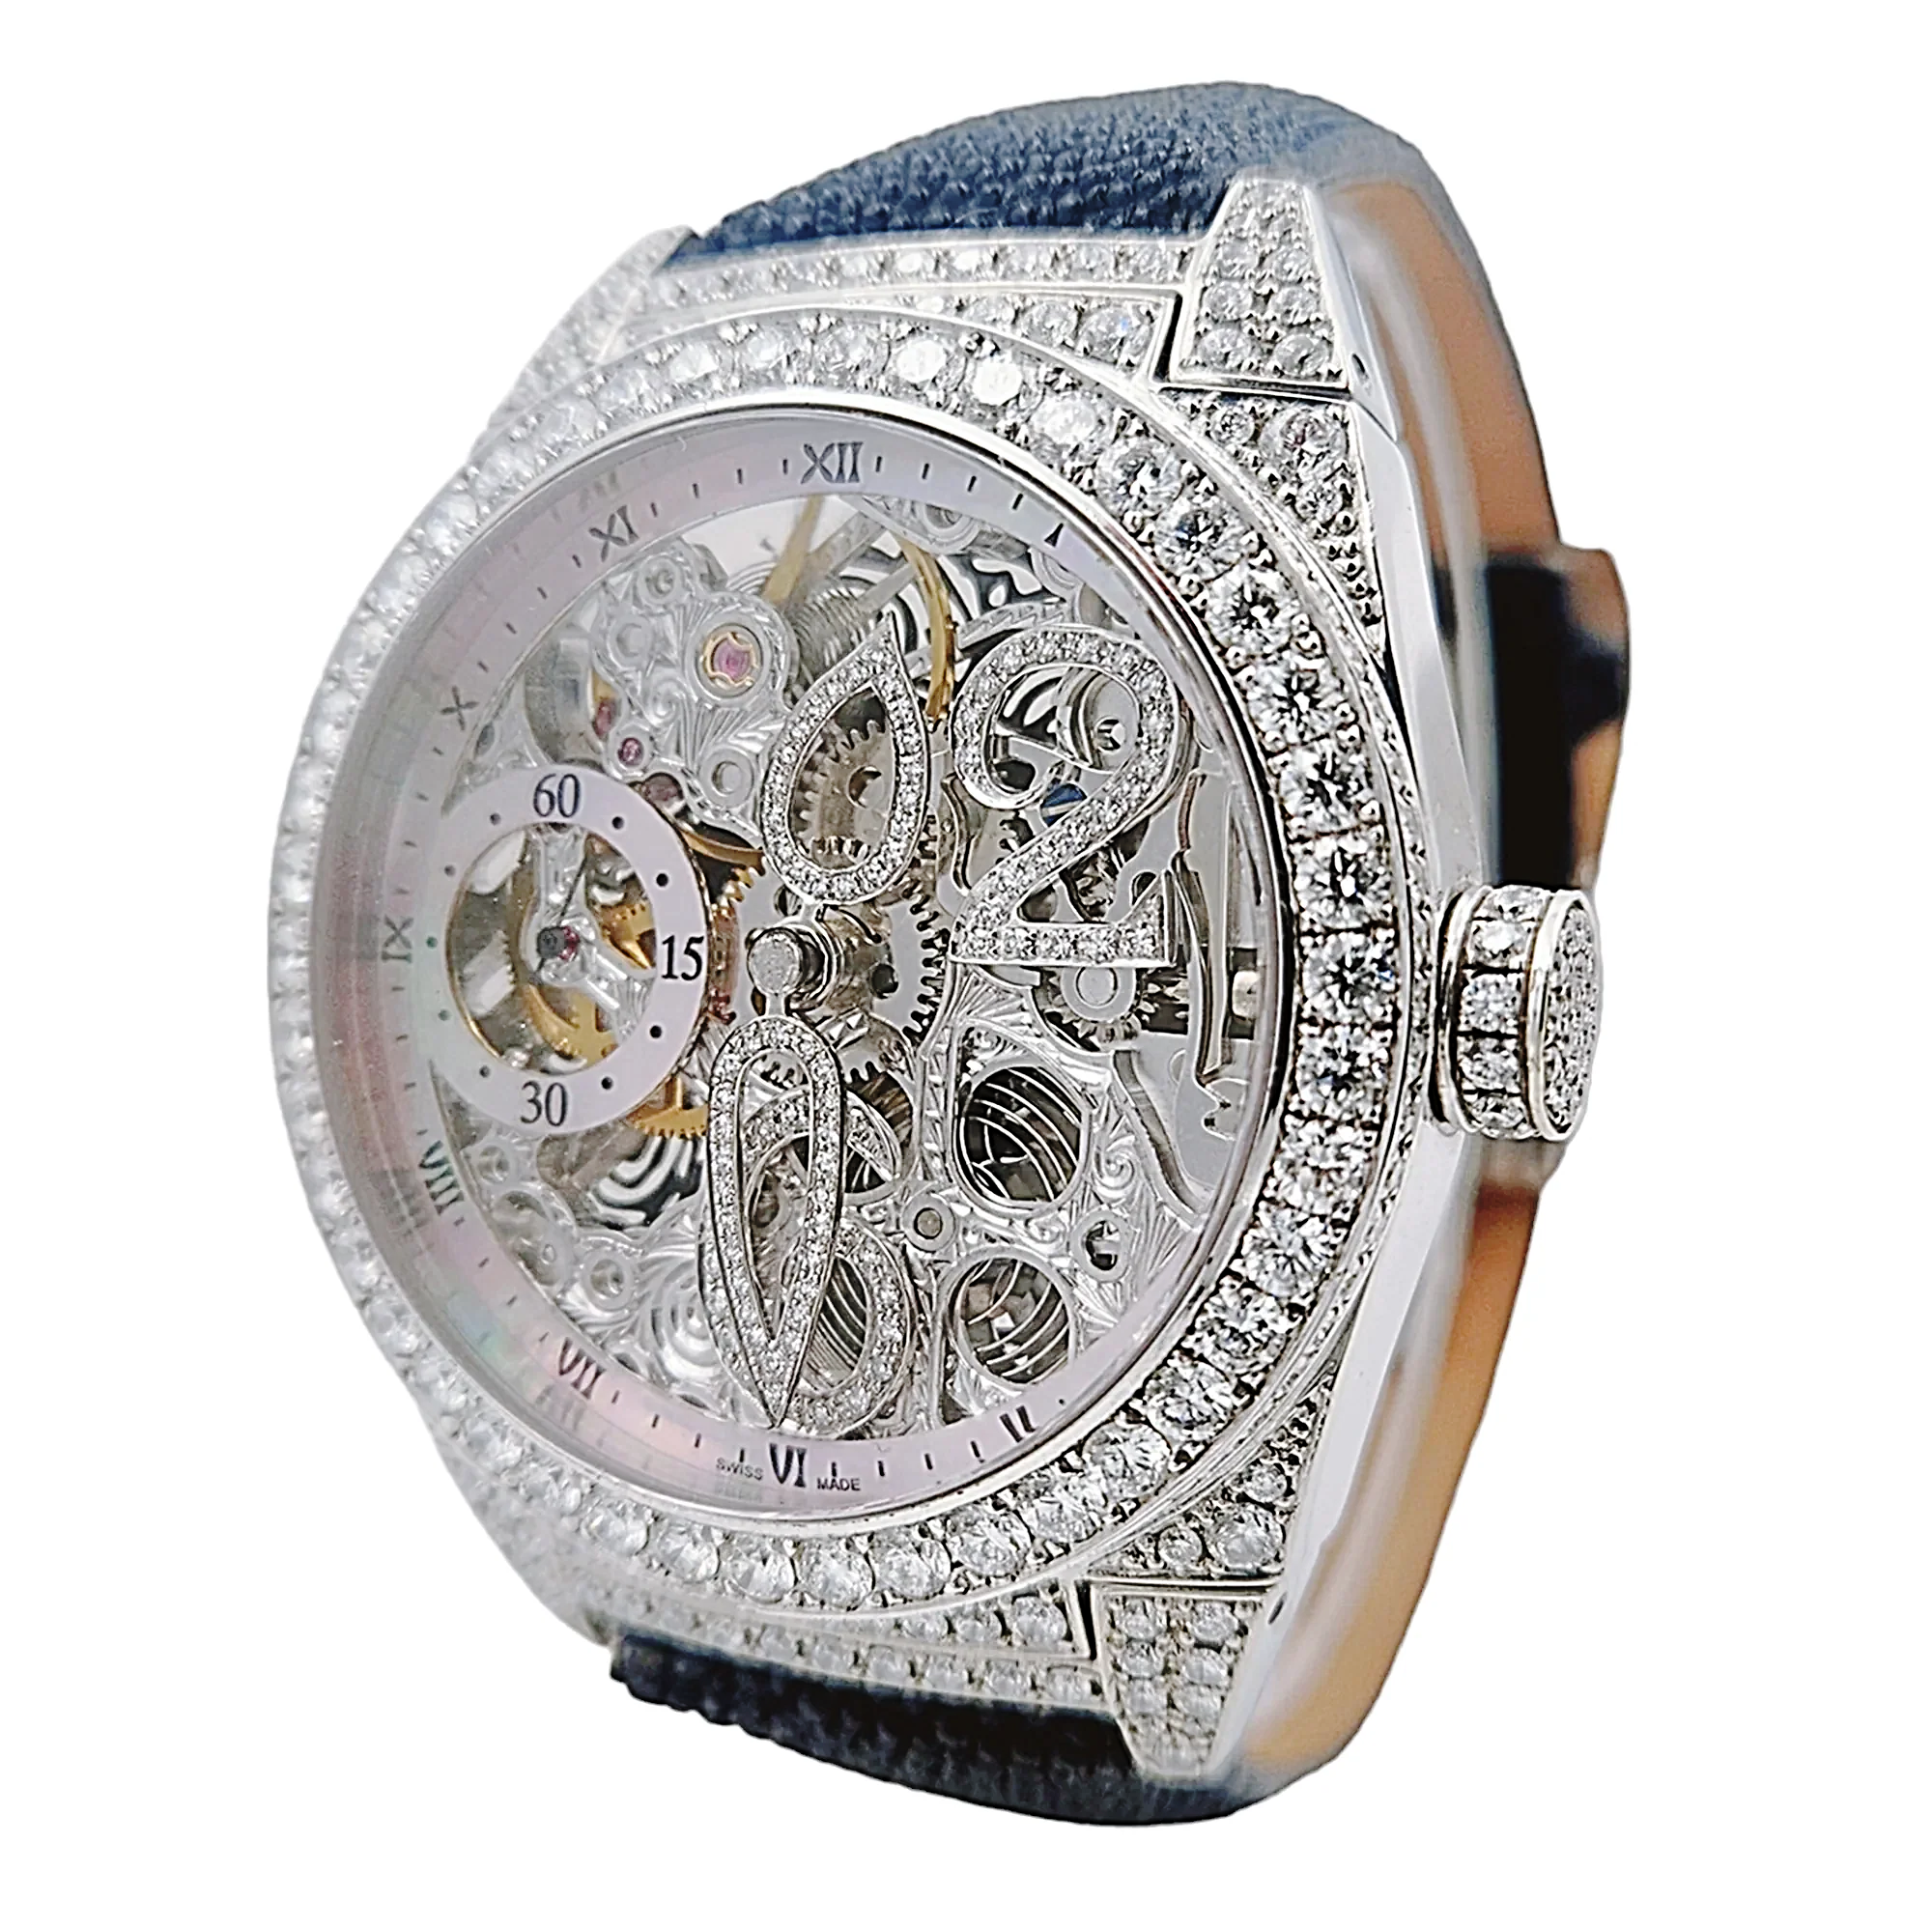 Men's D'Atlantis 44mm Full Diamond Skeleton Automatic Watch with Mother of Pearl Dial and Diamond Bezel. (Pre-Owned)